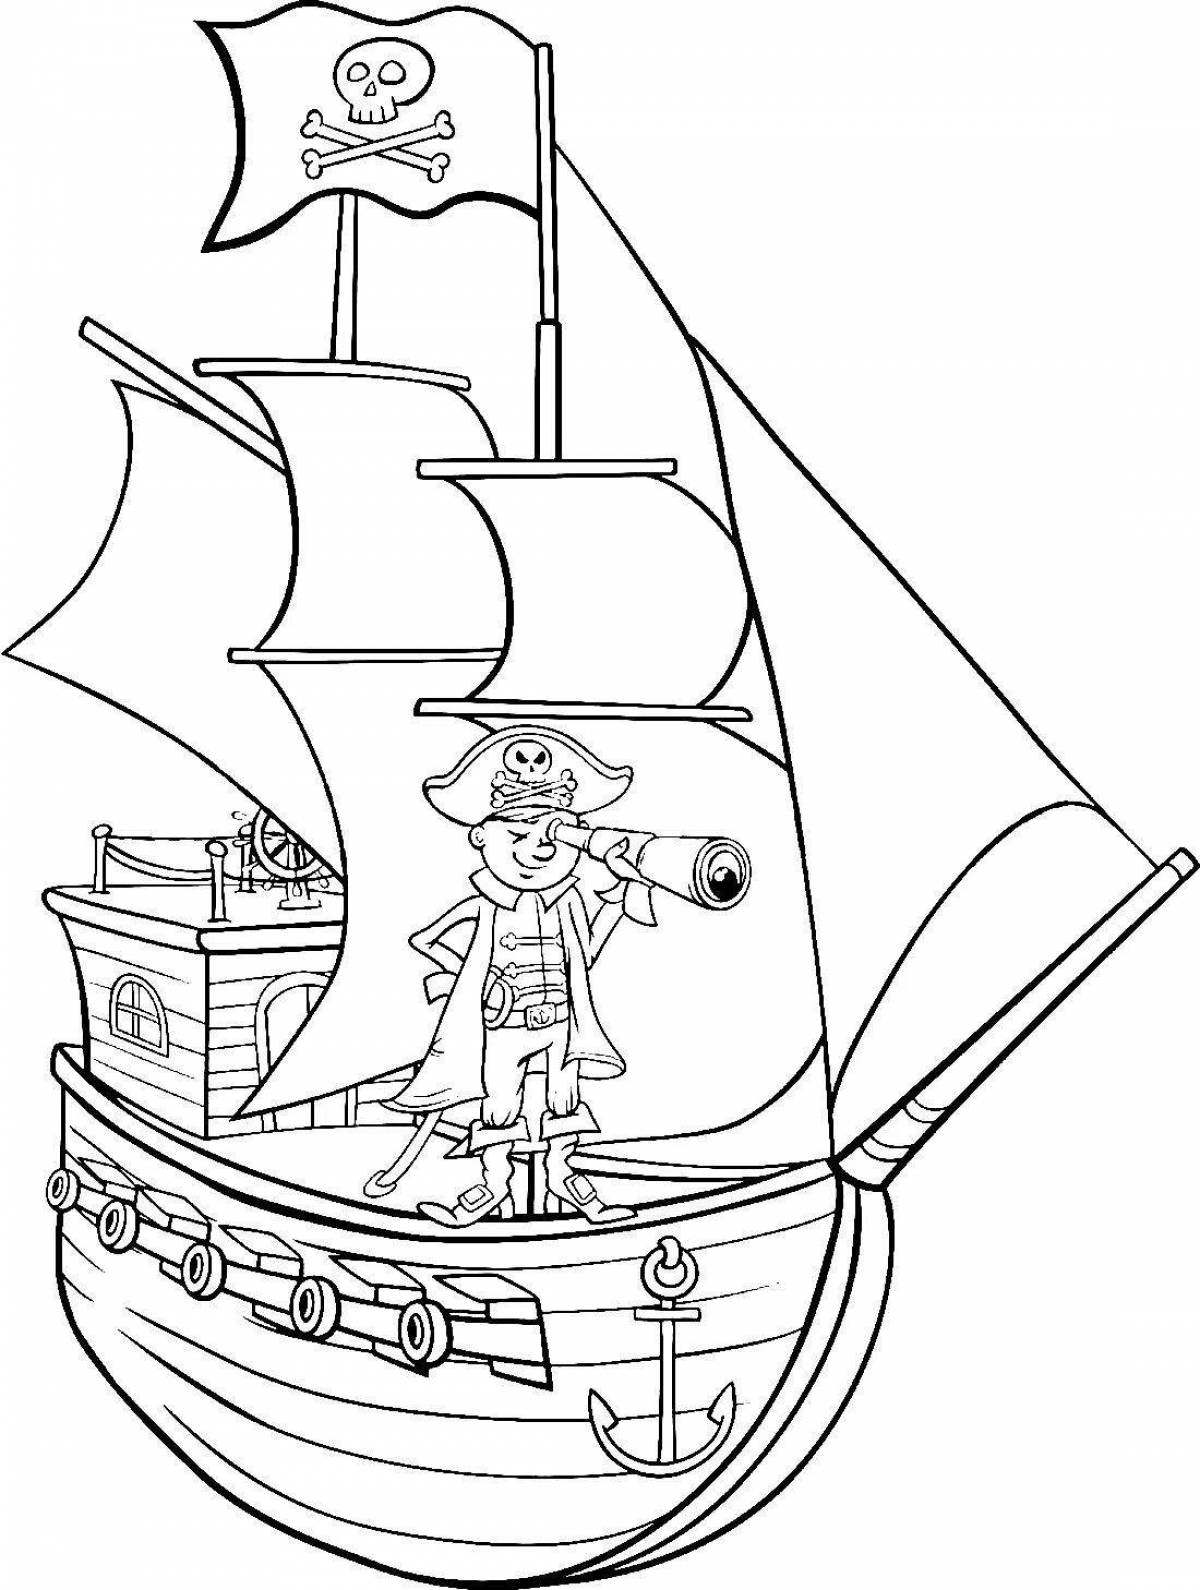 Coloring page fighting ship captain